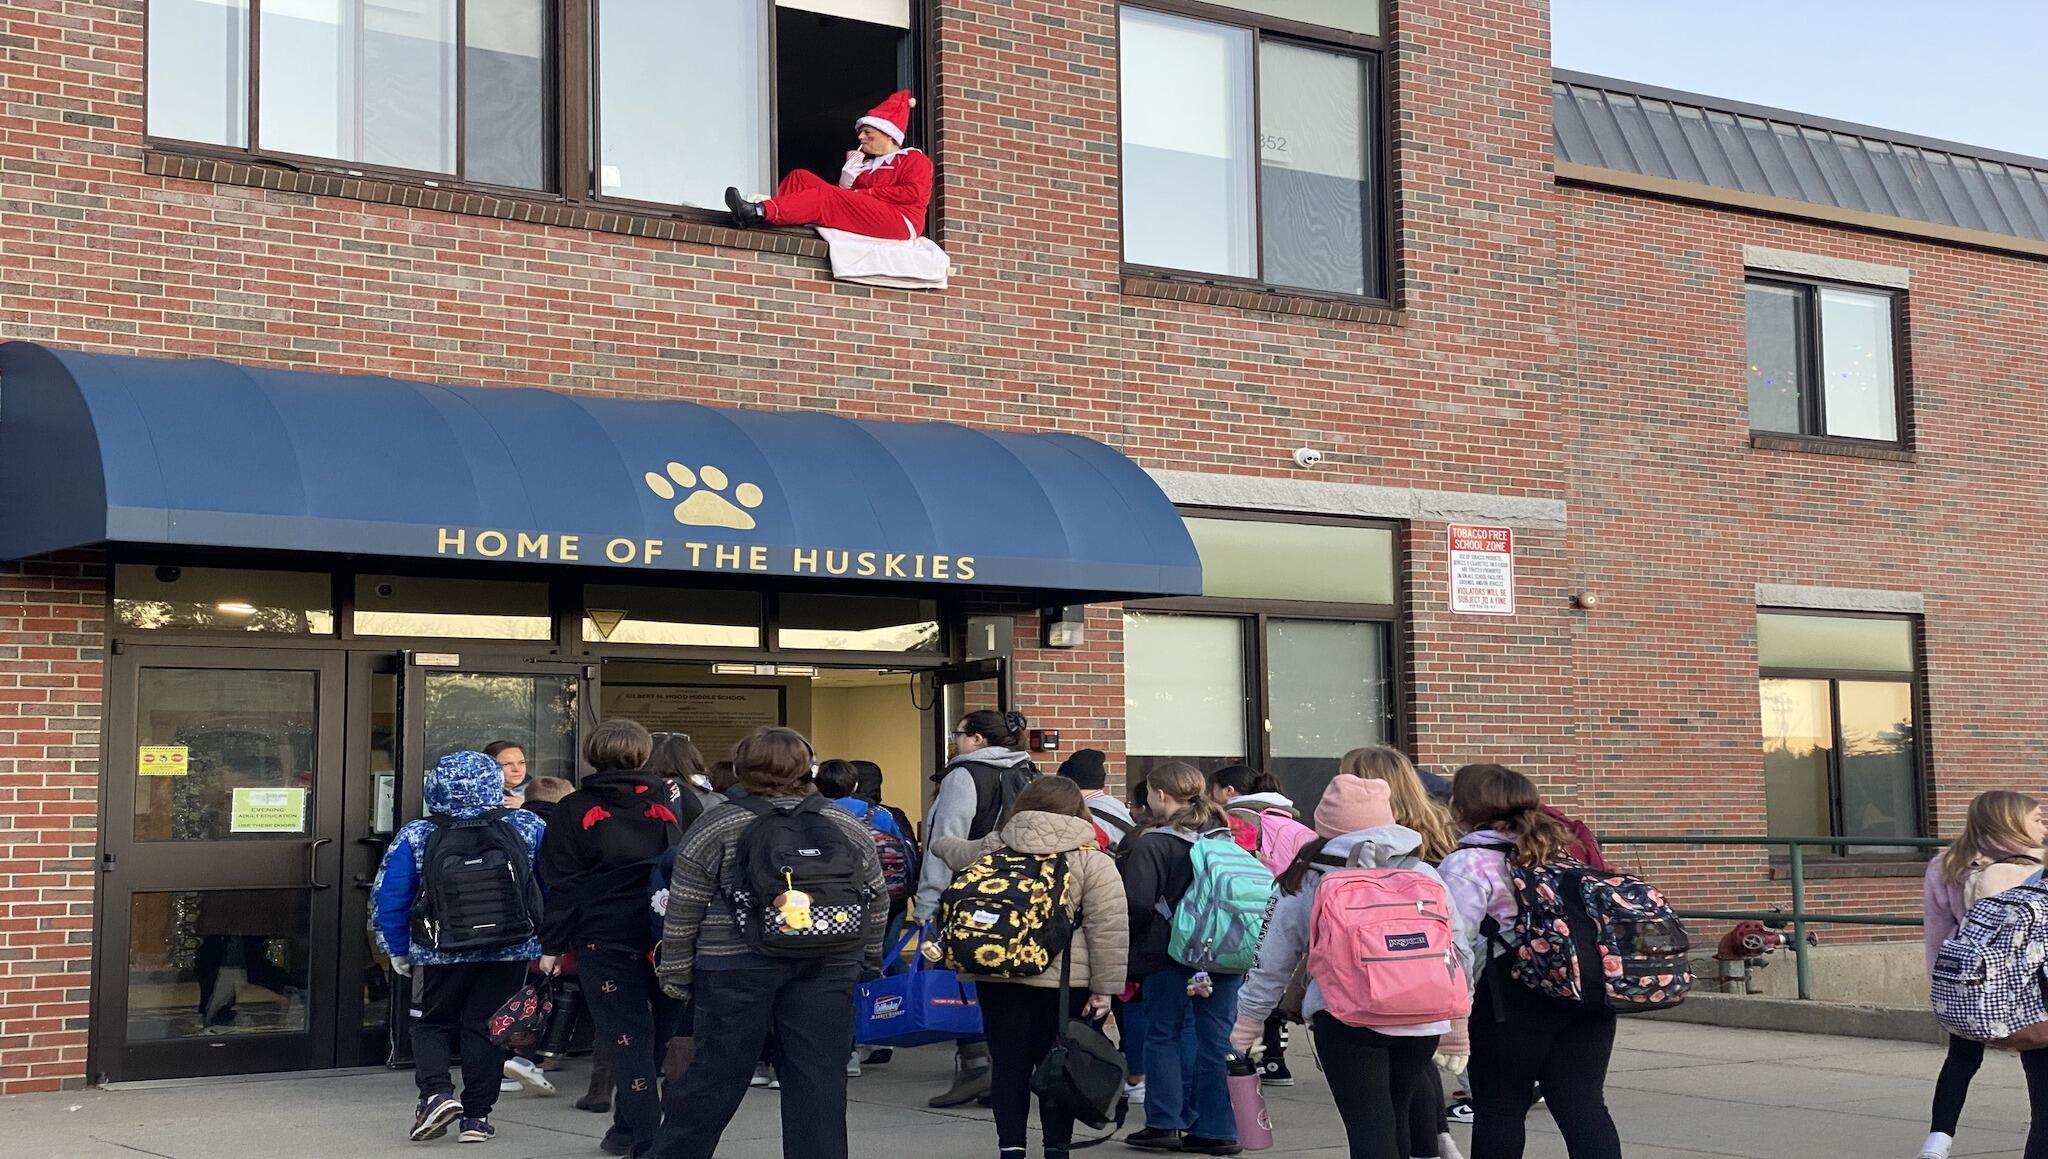 Students entering the school building with an elf sitting in the window above the door.